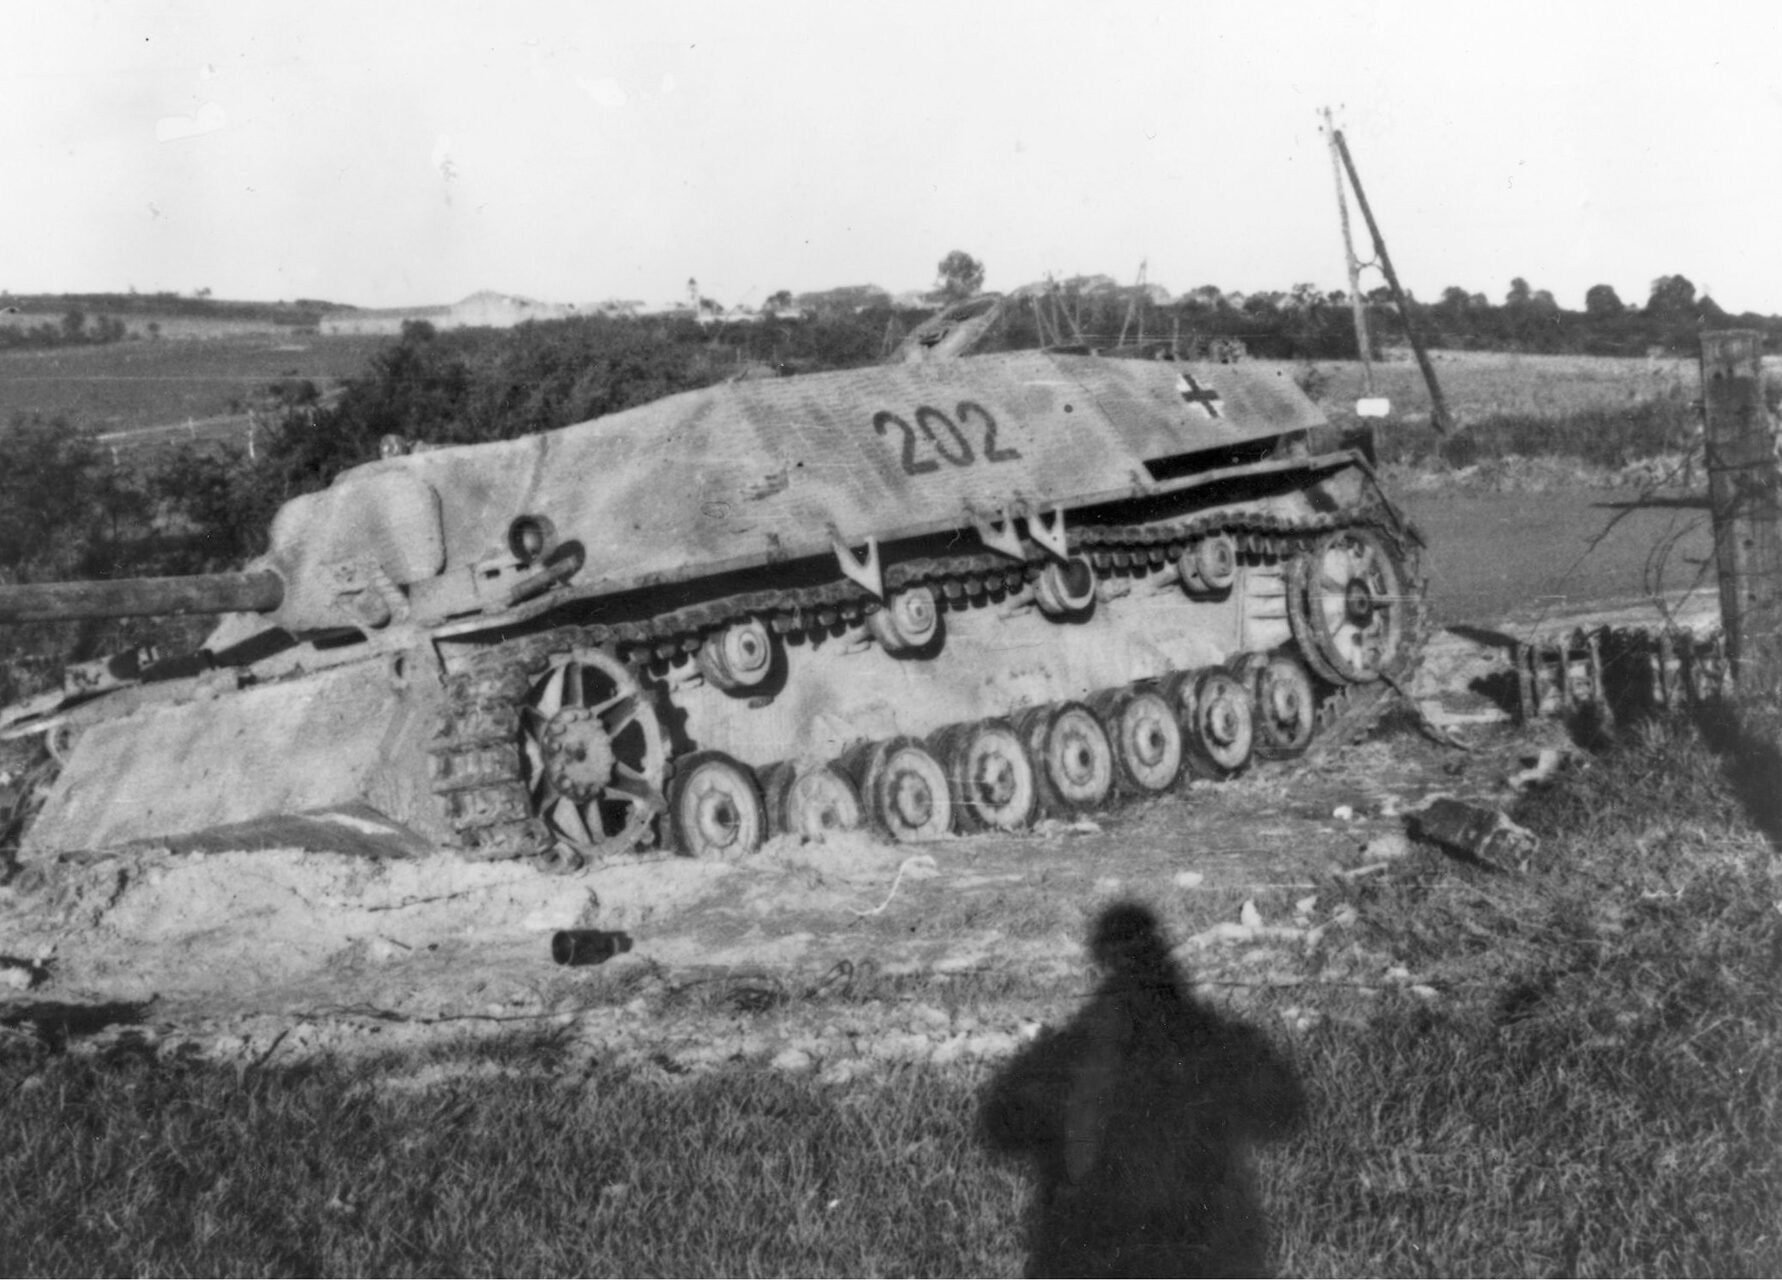 Patton spent his birthday, November 11, 1944, “getting where the dead were still warm.” He enjoyed his day by snapping a photograph of a recently captured German Stu. Gesch. 111 self-propelled gun. Patton’s shadow can be seen in the picture.